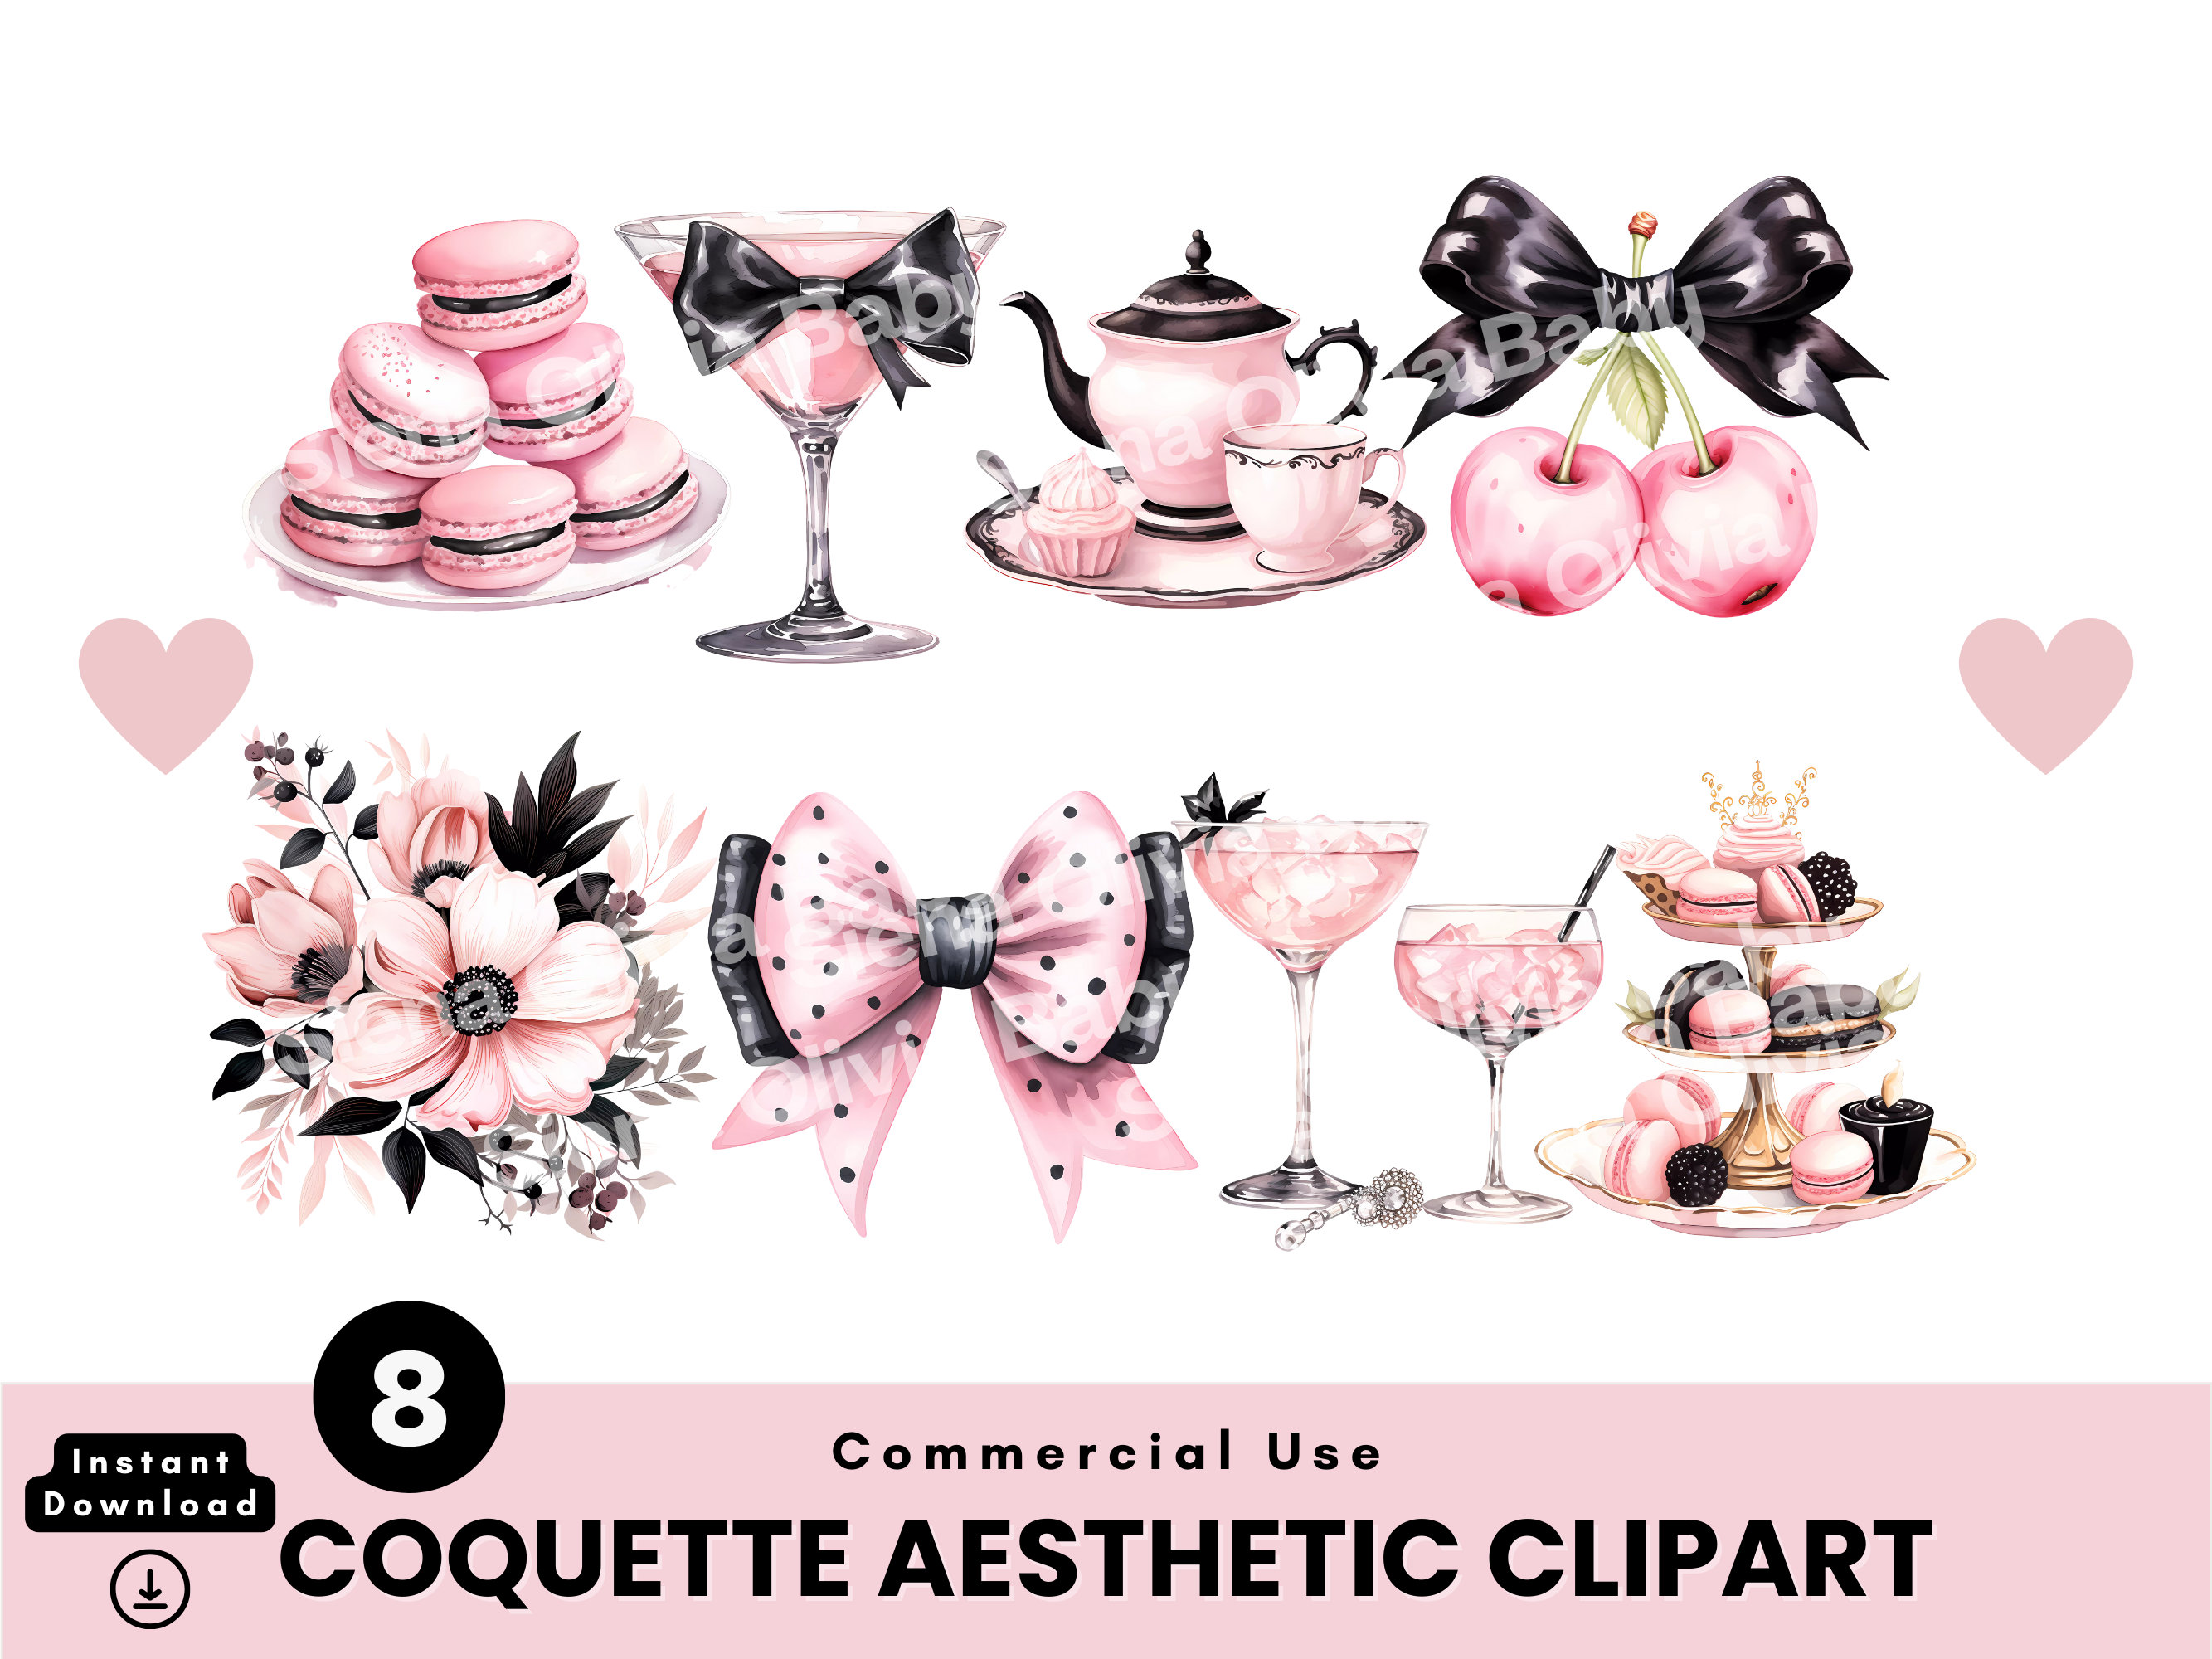 Coquette Poster and Sticker Bundle Pack / Coquette Room Decor / Coquette  Posters / Coquette Stickers / Coquette Aesthetic / Coquette Bundle 